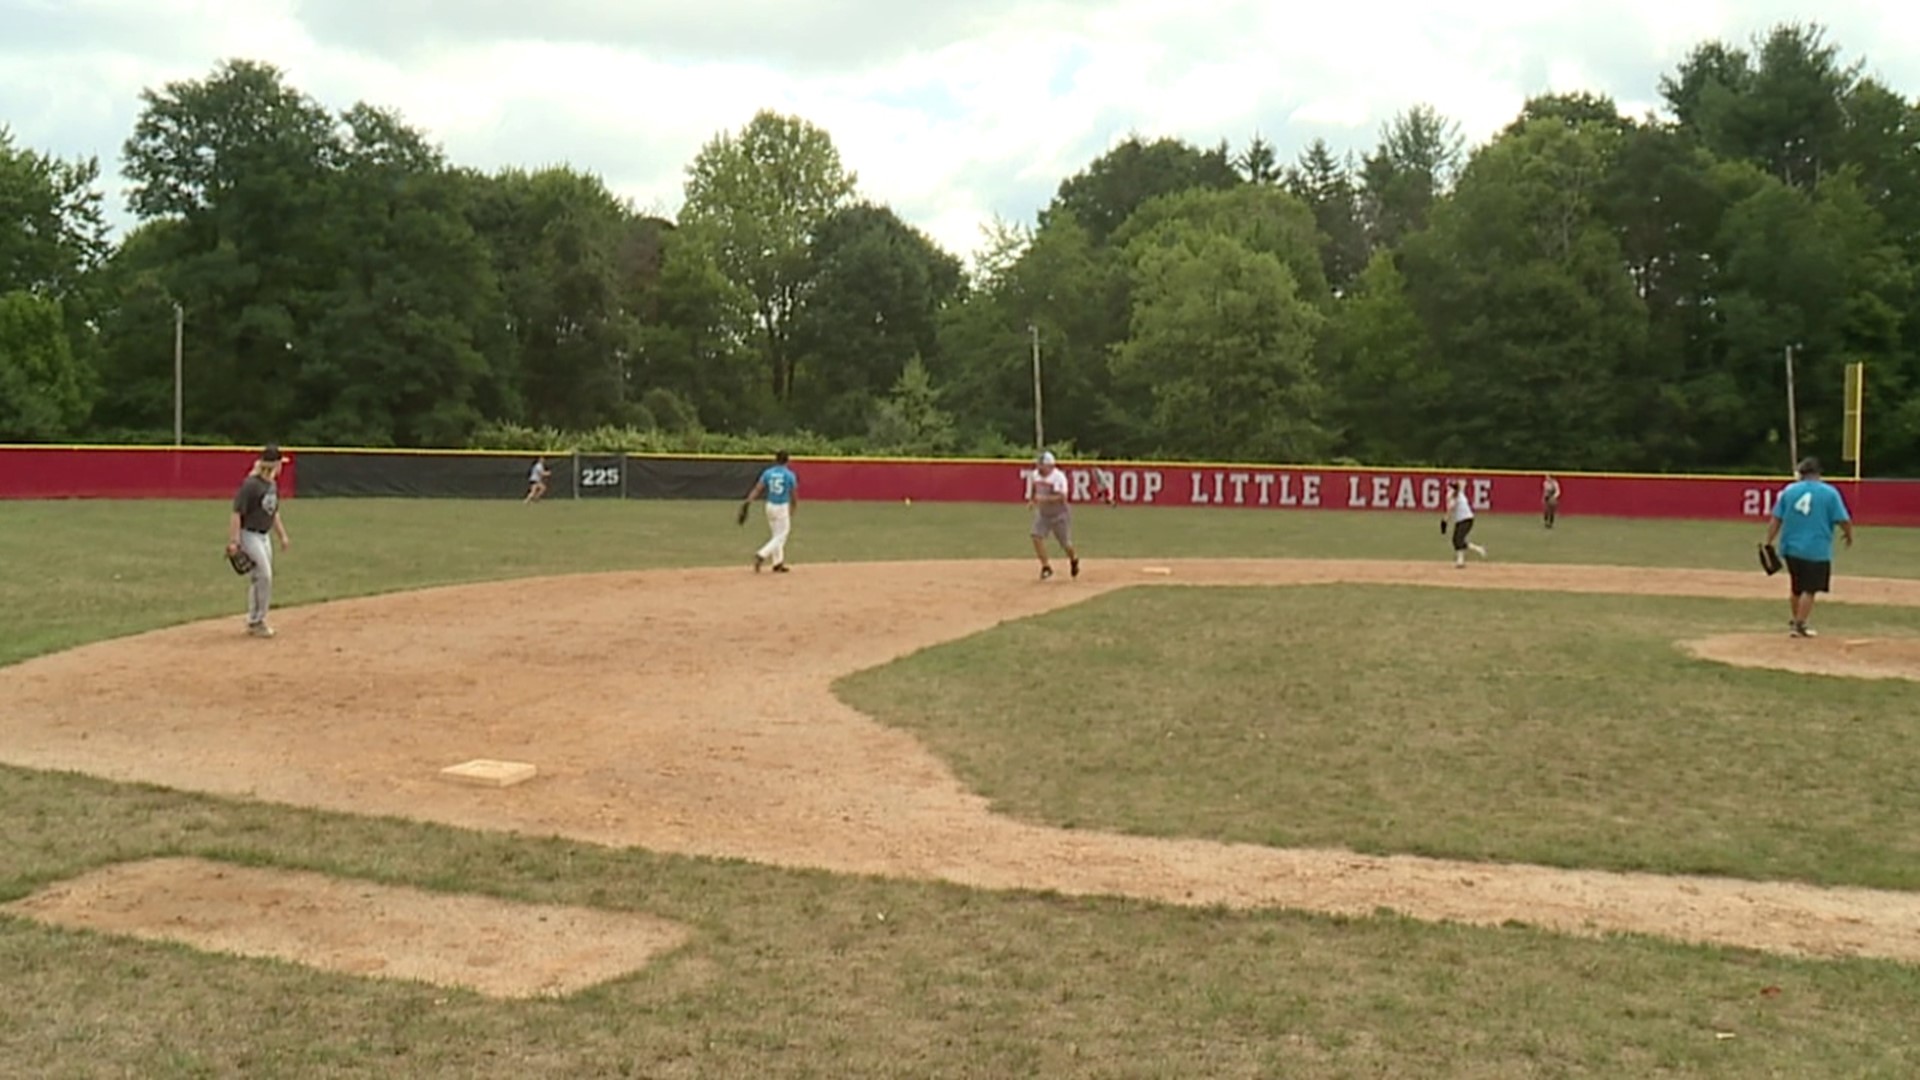 The softball tournament was held at the Little League Fields in Throop Saturday afternoon.